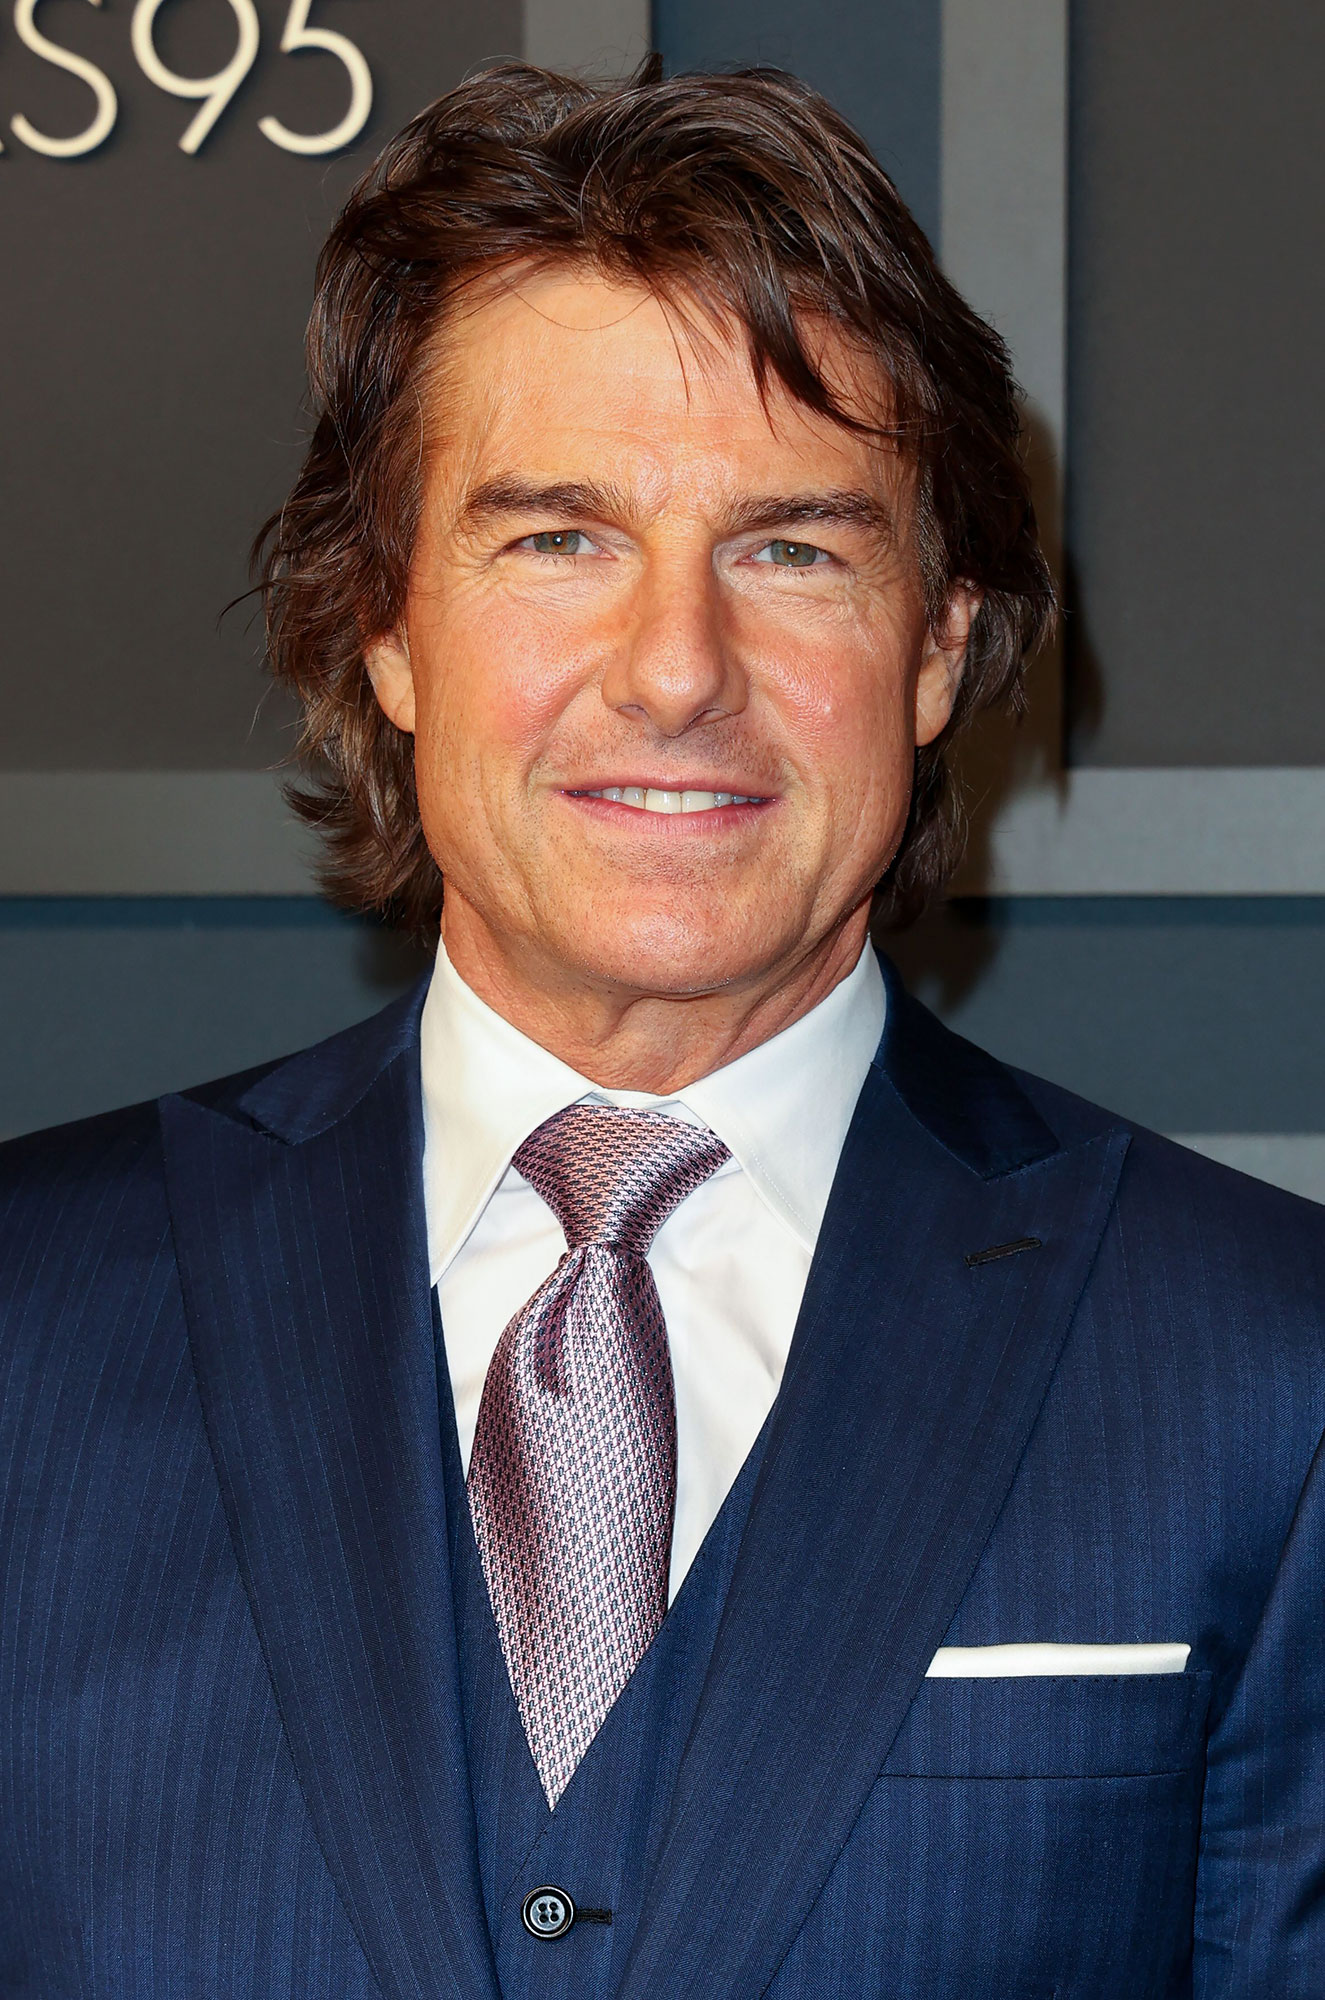 Tom Cruise Shows of Longer Locks and a Sun-Kissed Tan: Photos